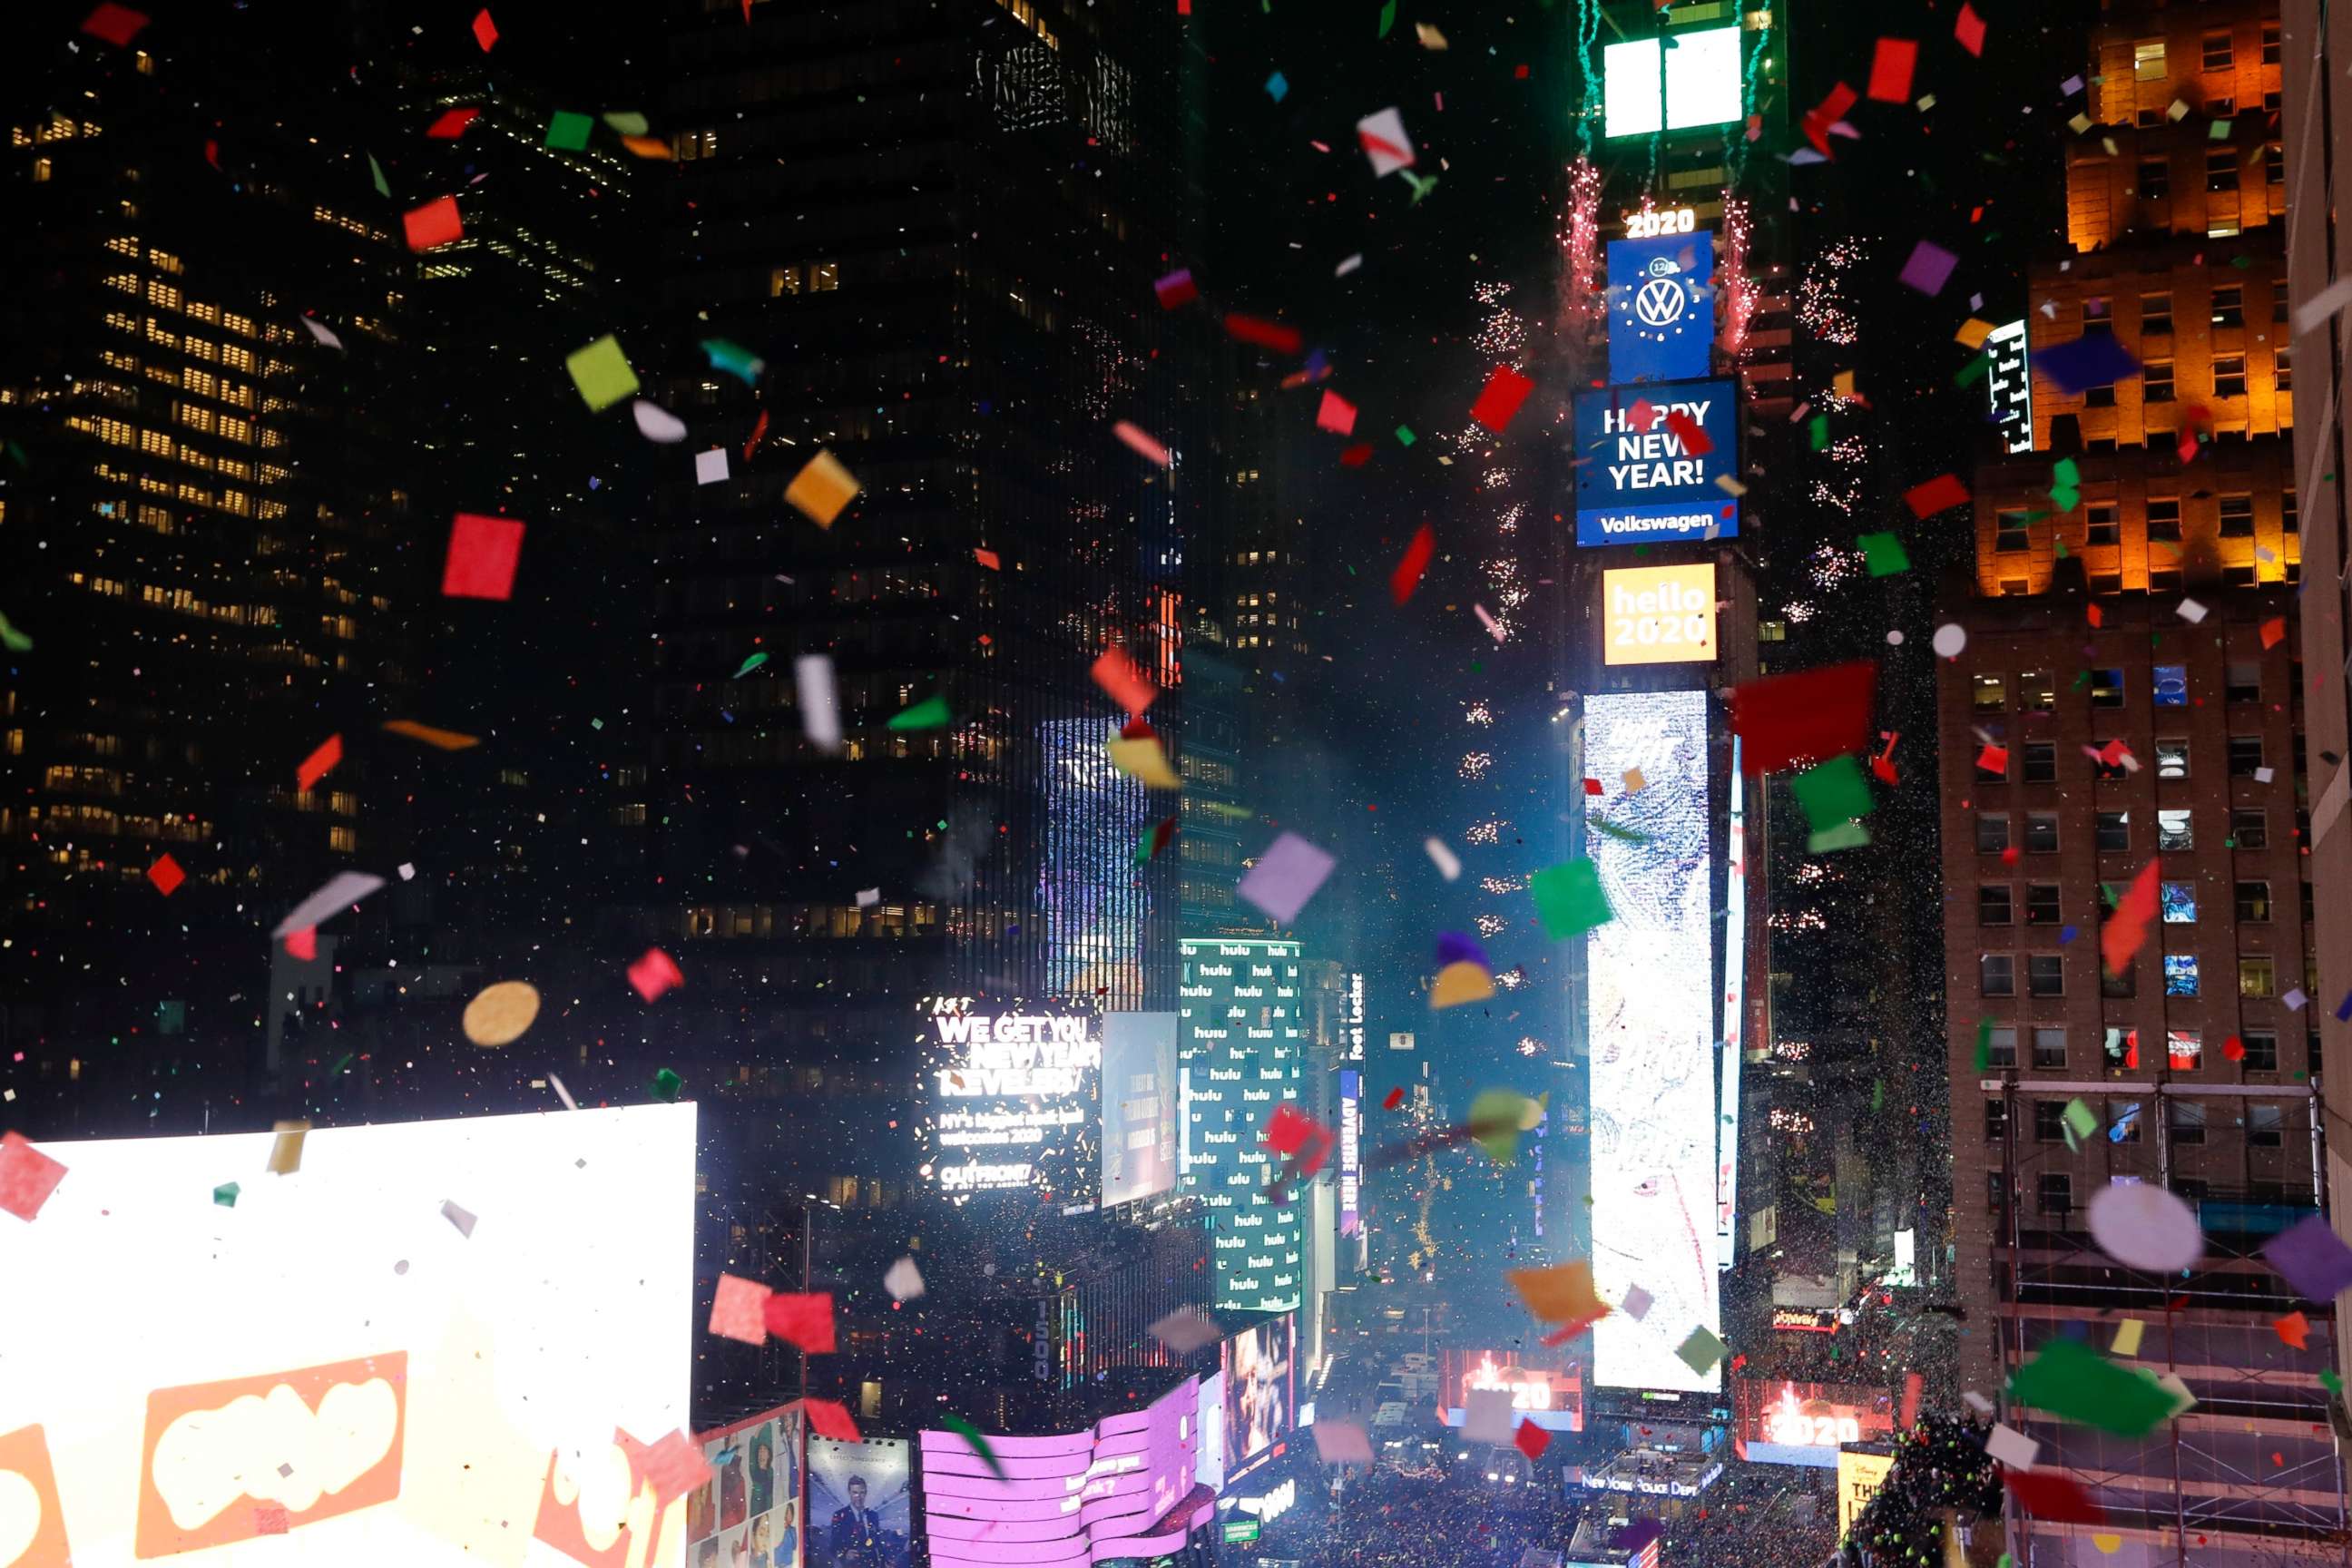 PHOTO: Confetti drops over the crowd as the clock strikes midnight during the New Year's celebration as seen from the New York Marriott Marquis in New York's Times Square, Wednesday, Jan. 1, 2020. 